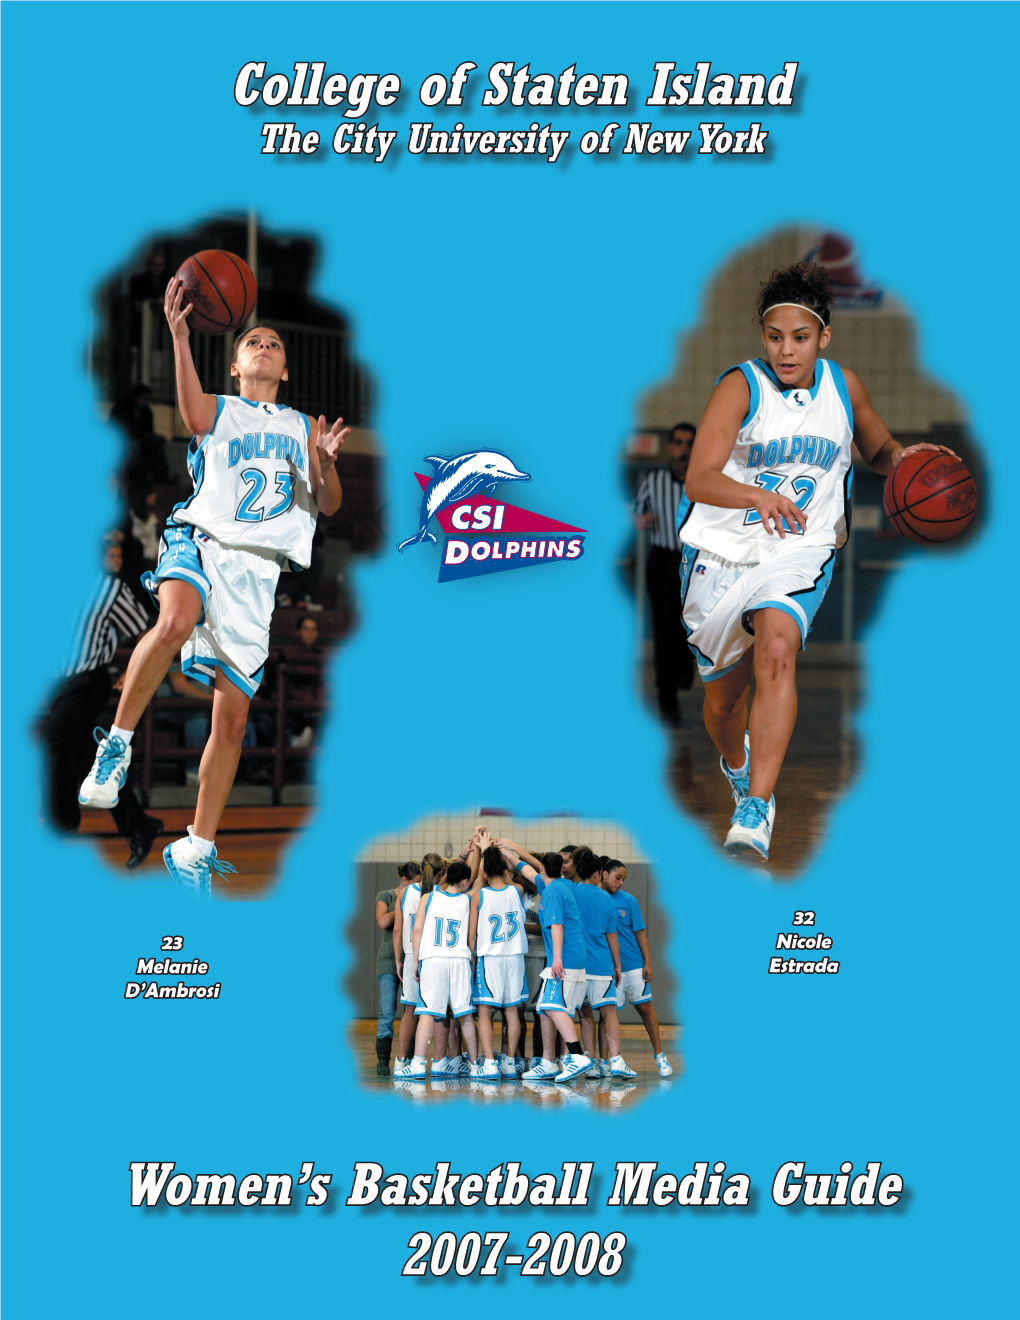 WBB Media Guide 07-08 Condensed.Indd